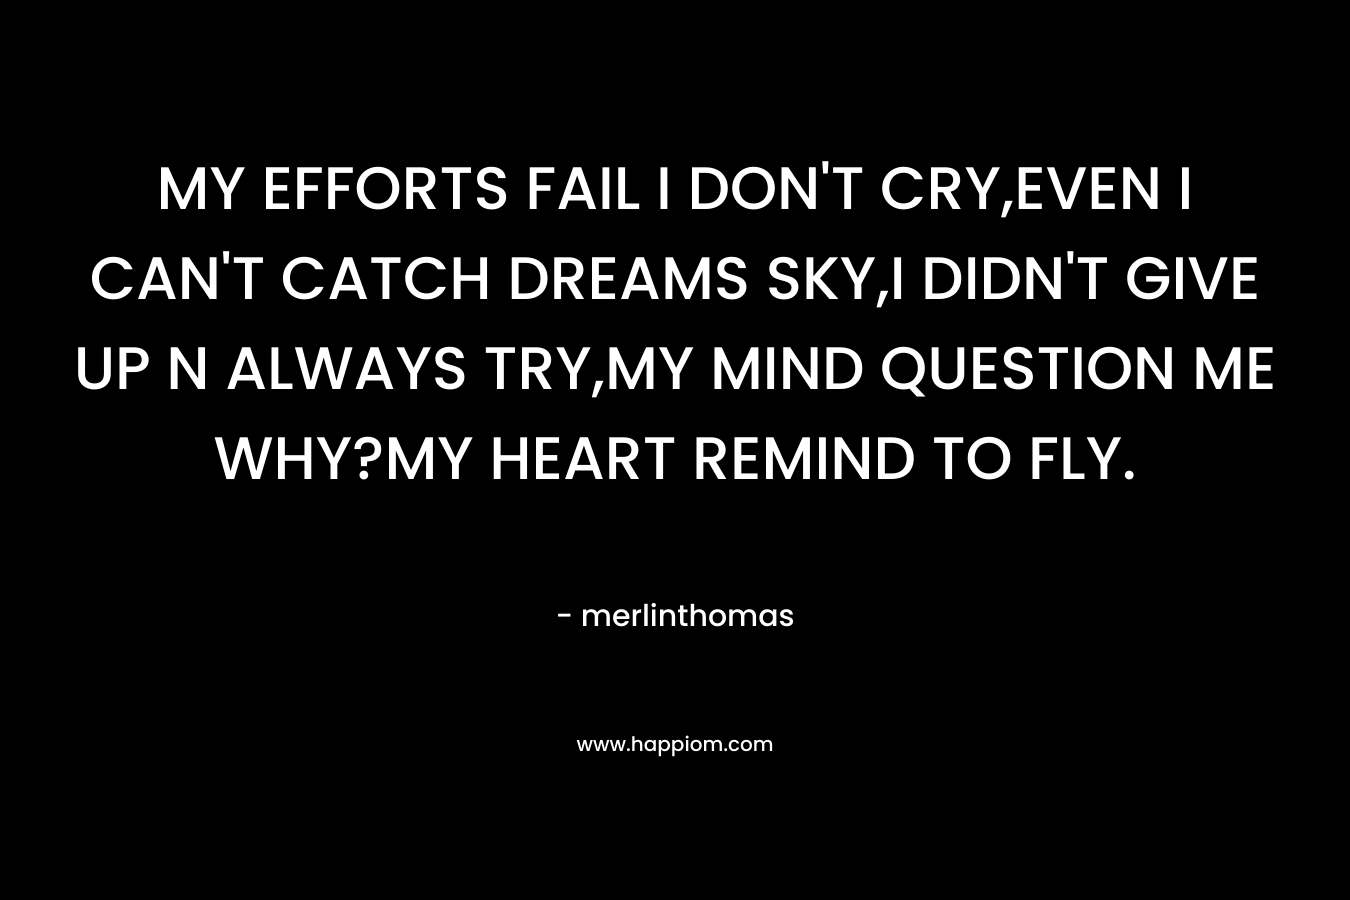 MY EFFORTS FAIL I DON’T CRY,EVEN I CAN’T CATCH DREAMS SKY,I DIDN’T GIVE UP N ALWAYS TRY,MY MIND QUESTION ME WHY?MY HEART REMIND TO FLY. – merlinthomas